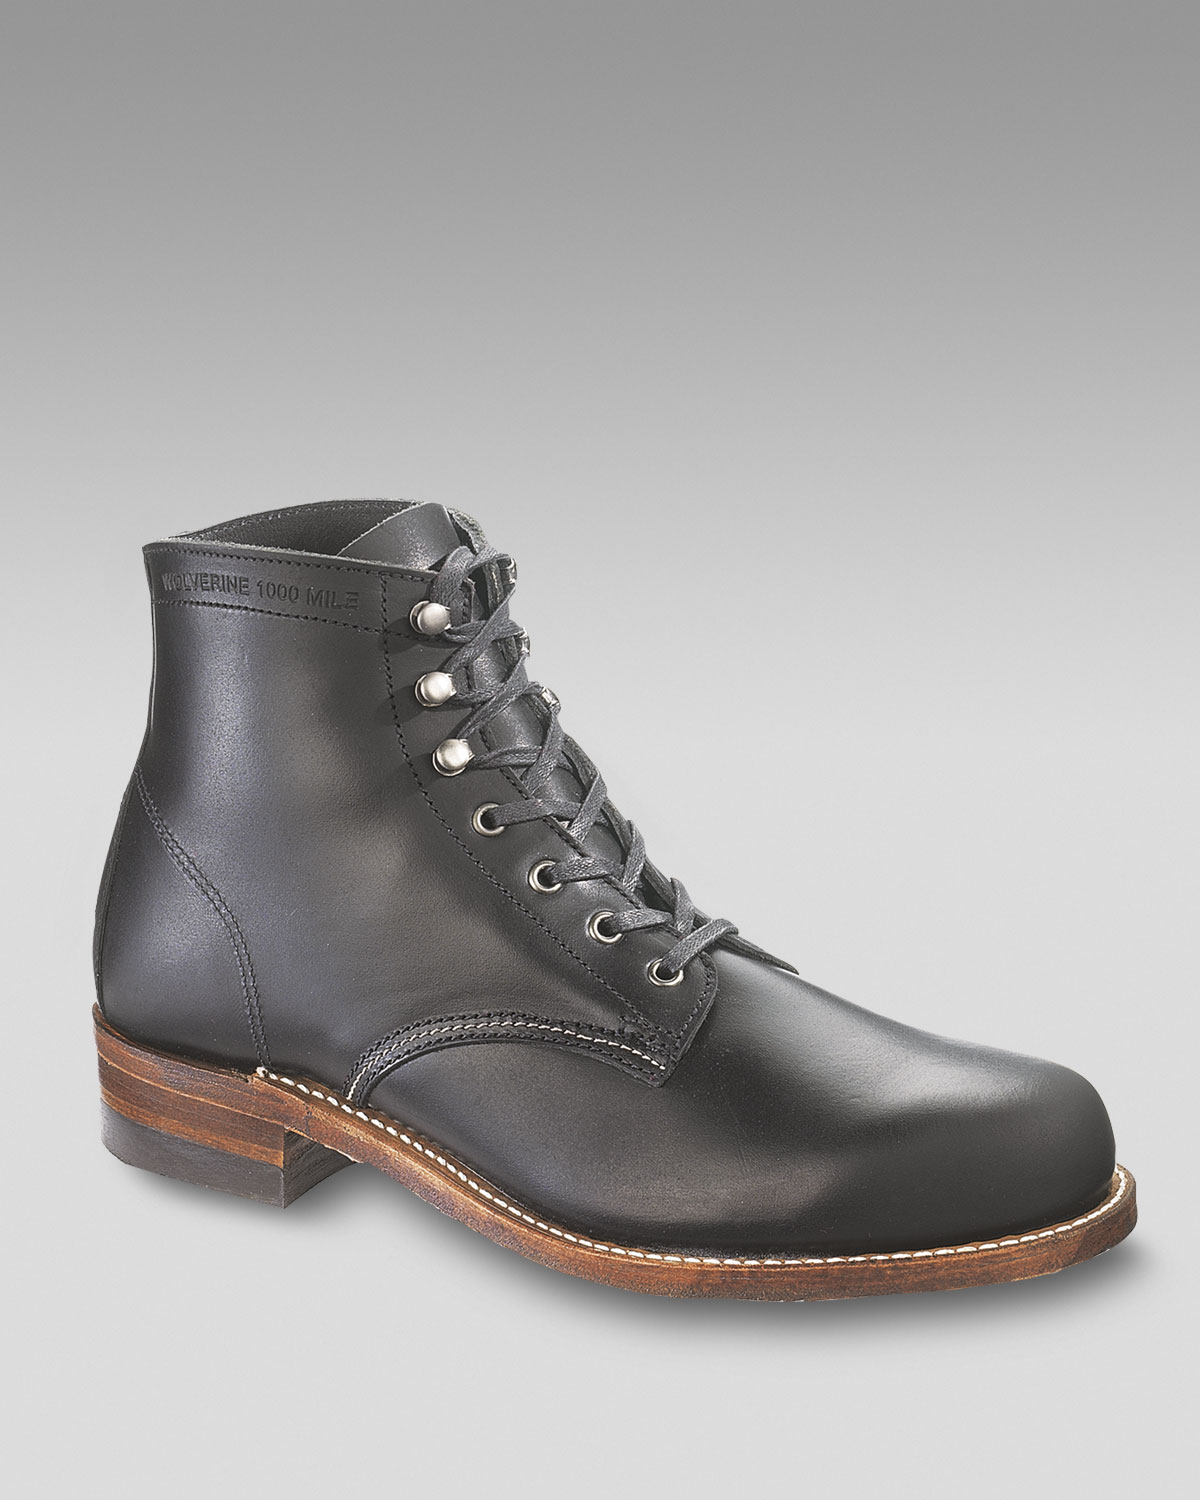 Wolverine Leather '1000 Mile' Plain Toe Boot in Black for Men - Lyst